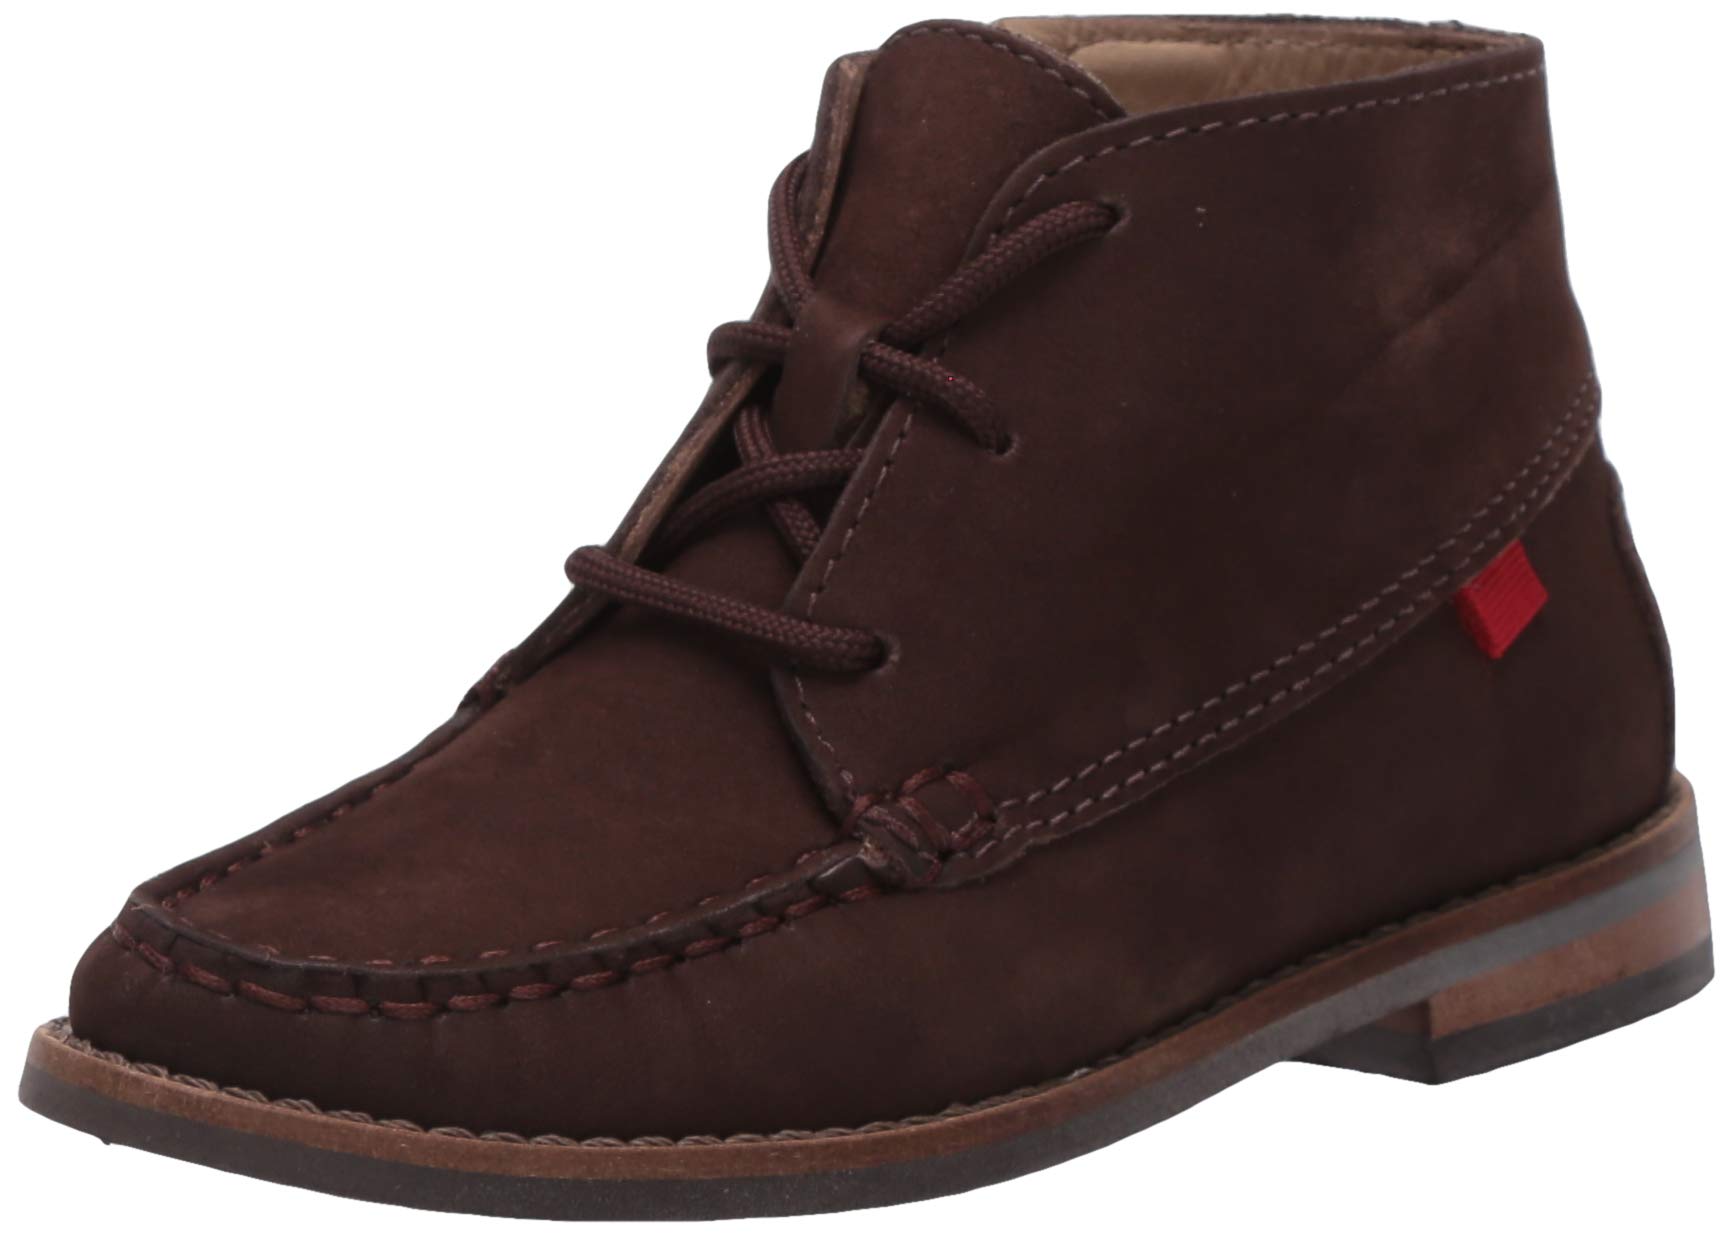 Marc Joseph New York Unisex-Kid's Leather Made in Brazil Chukka Ankle Boot with Laces, Brown Nubuck, 1.5 M US Little Kid